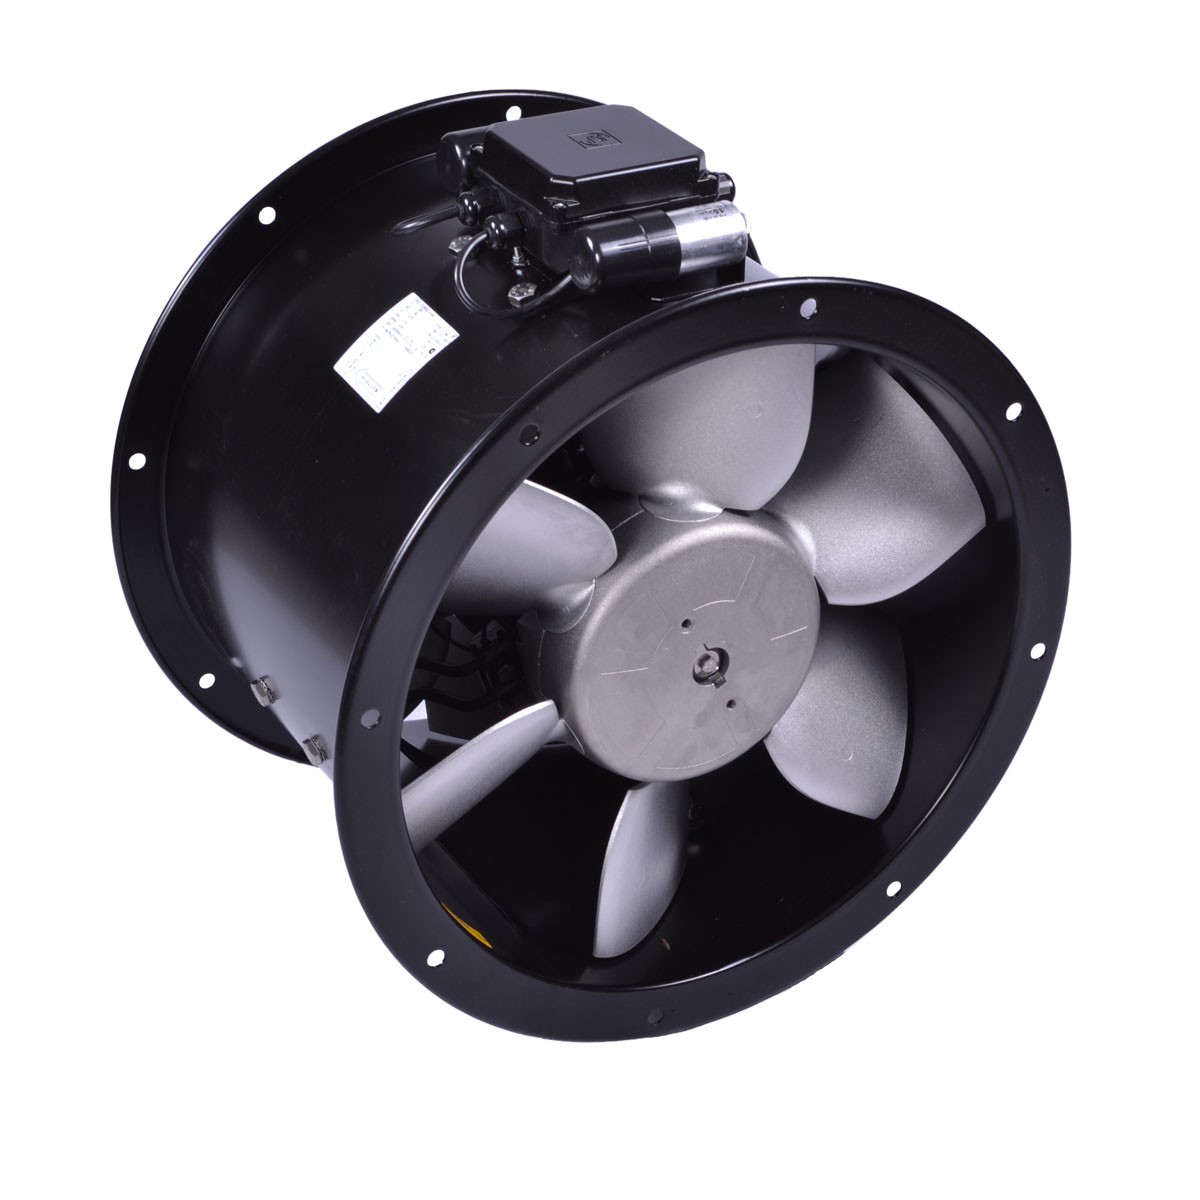 Replacement extract fans new reconditioned cheap